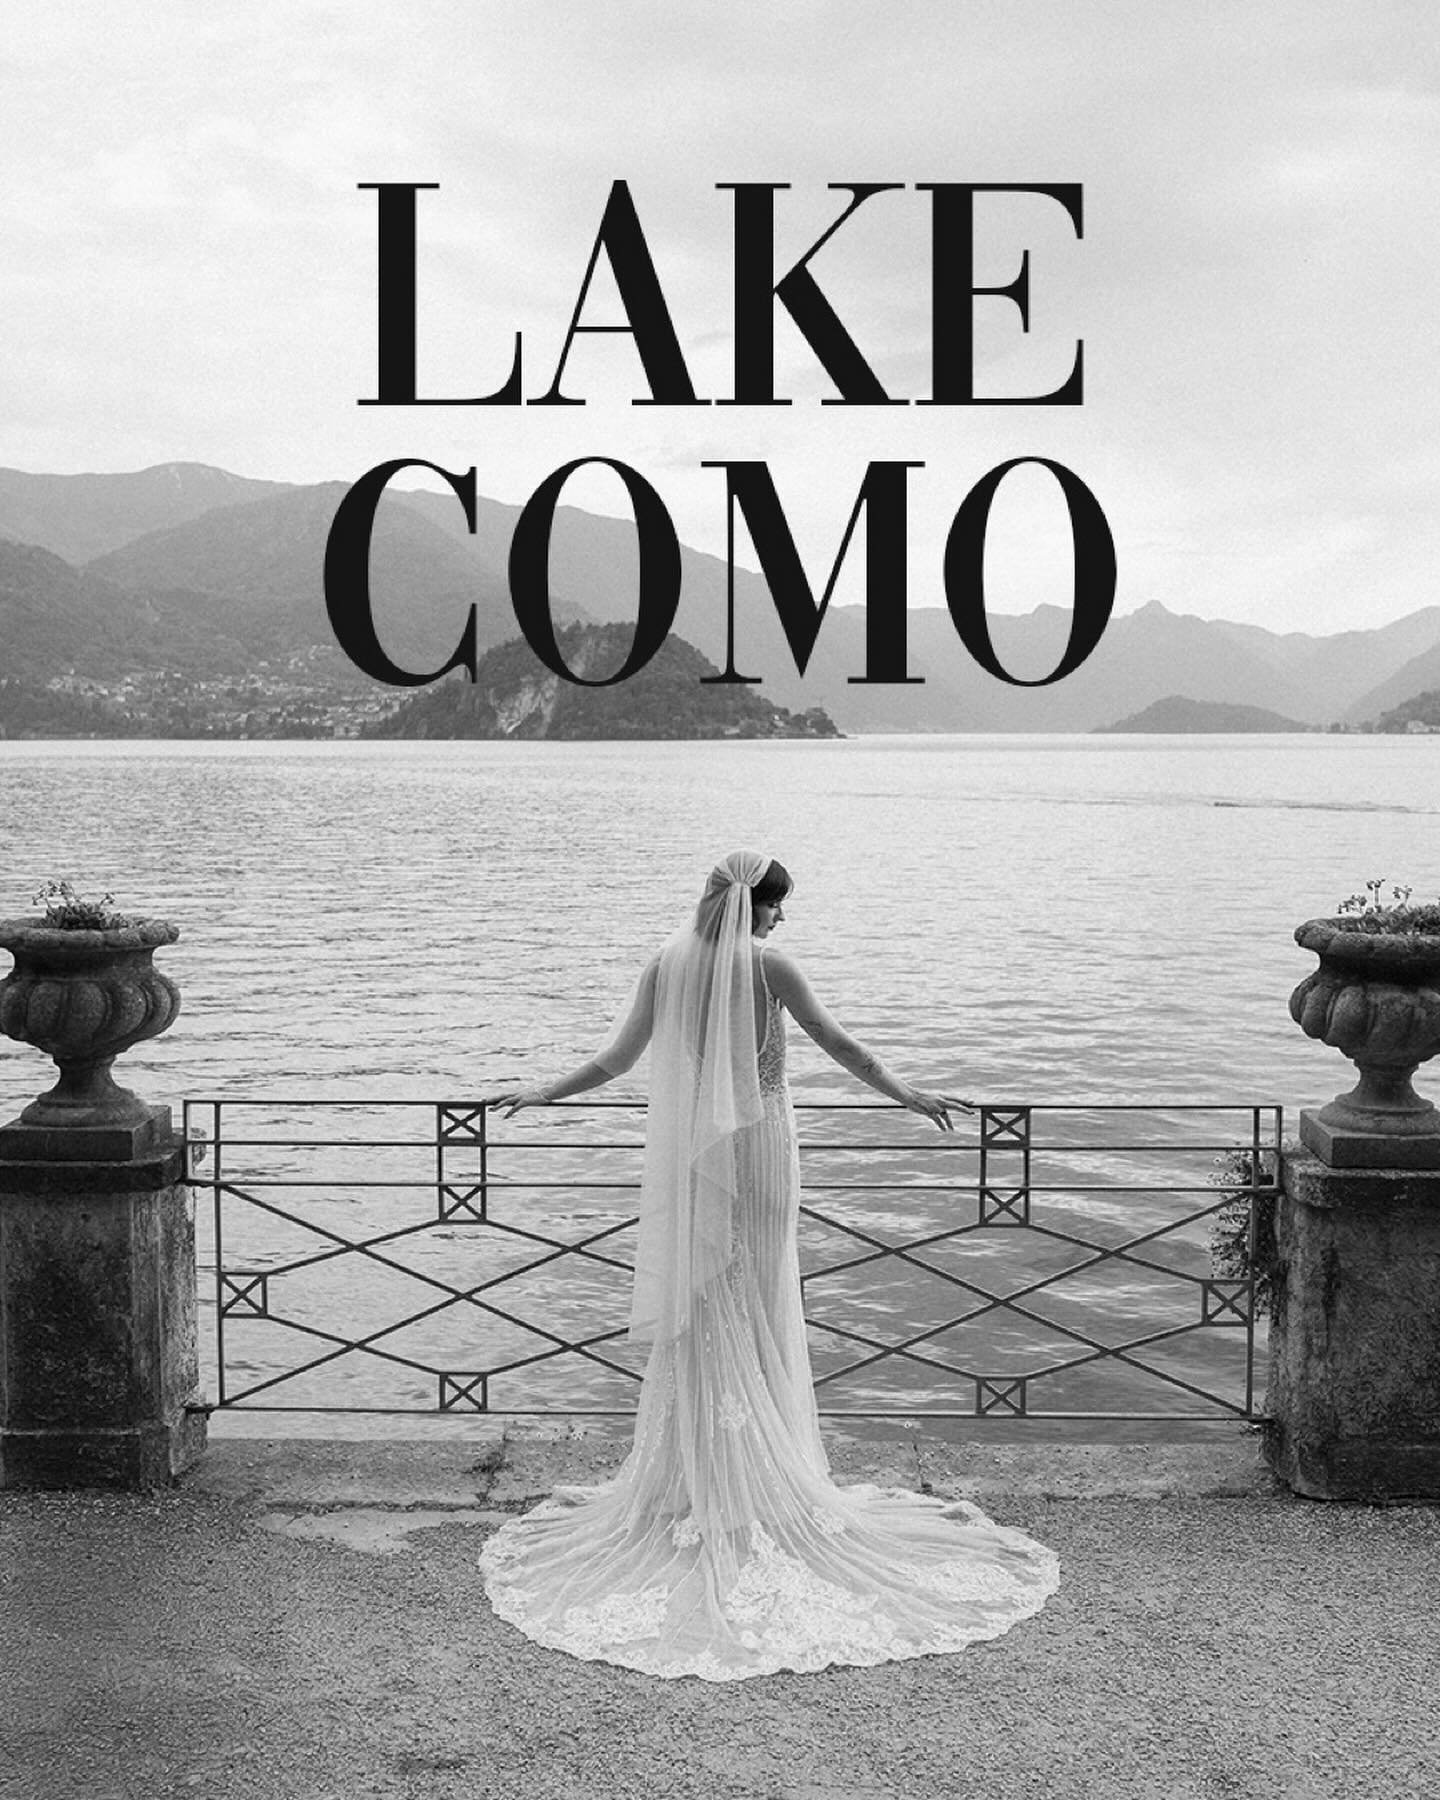 Witness the uniquely crafted elopement of Jesse and Emily at the stunning Villa Monastero in Lake Como.

Traveling from Alabama and despite the absence of a large crowd, Jesse and Emily&rsquo;s elopement was imbued with all the elements of a grand we